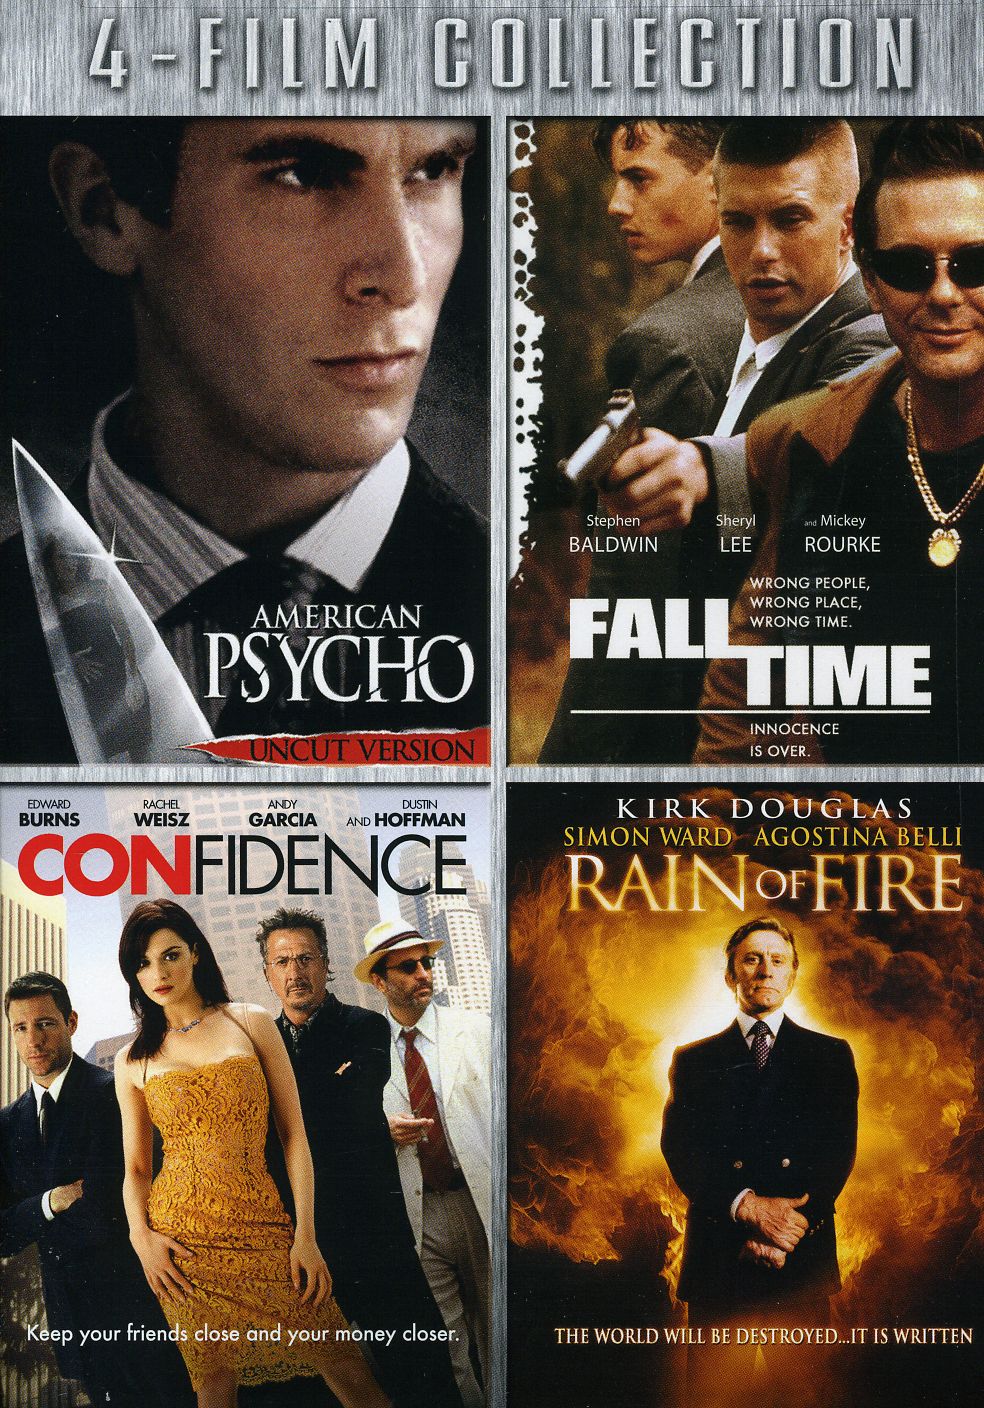 AMERICAN PSYCHO & FALL TIME & CONFIDENCE & RAIN OF